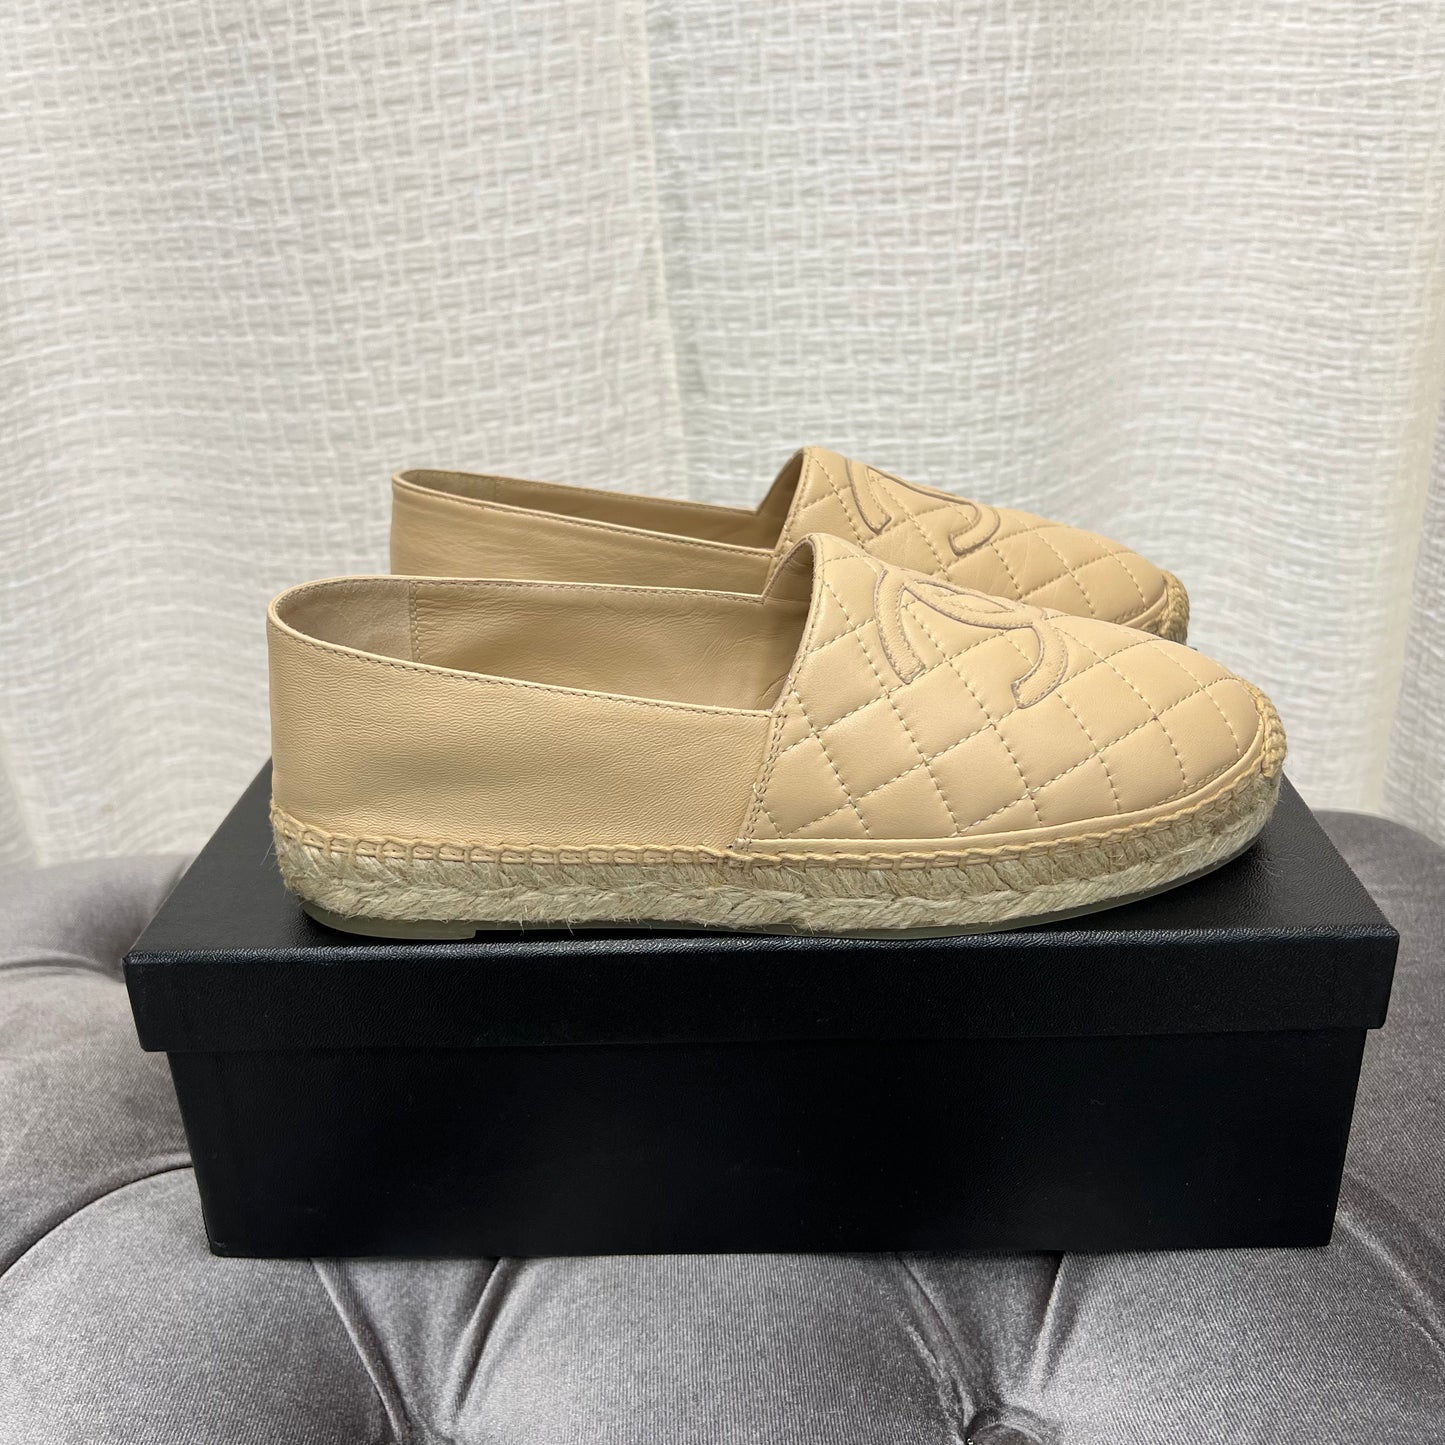 Chanel Beige Leather Quilted Espadrilles, Size 37